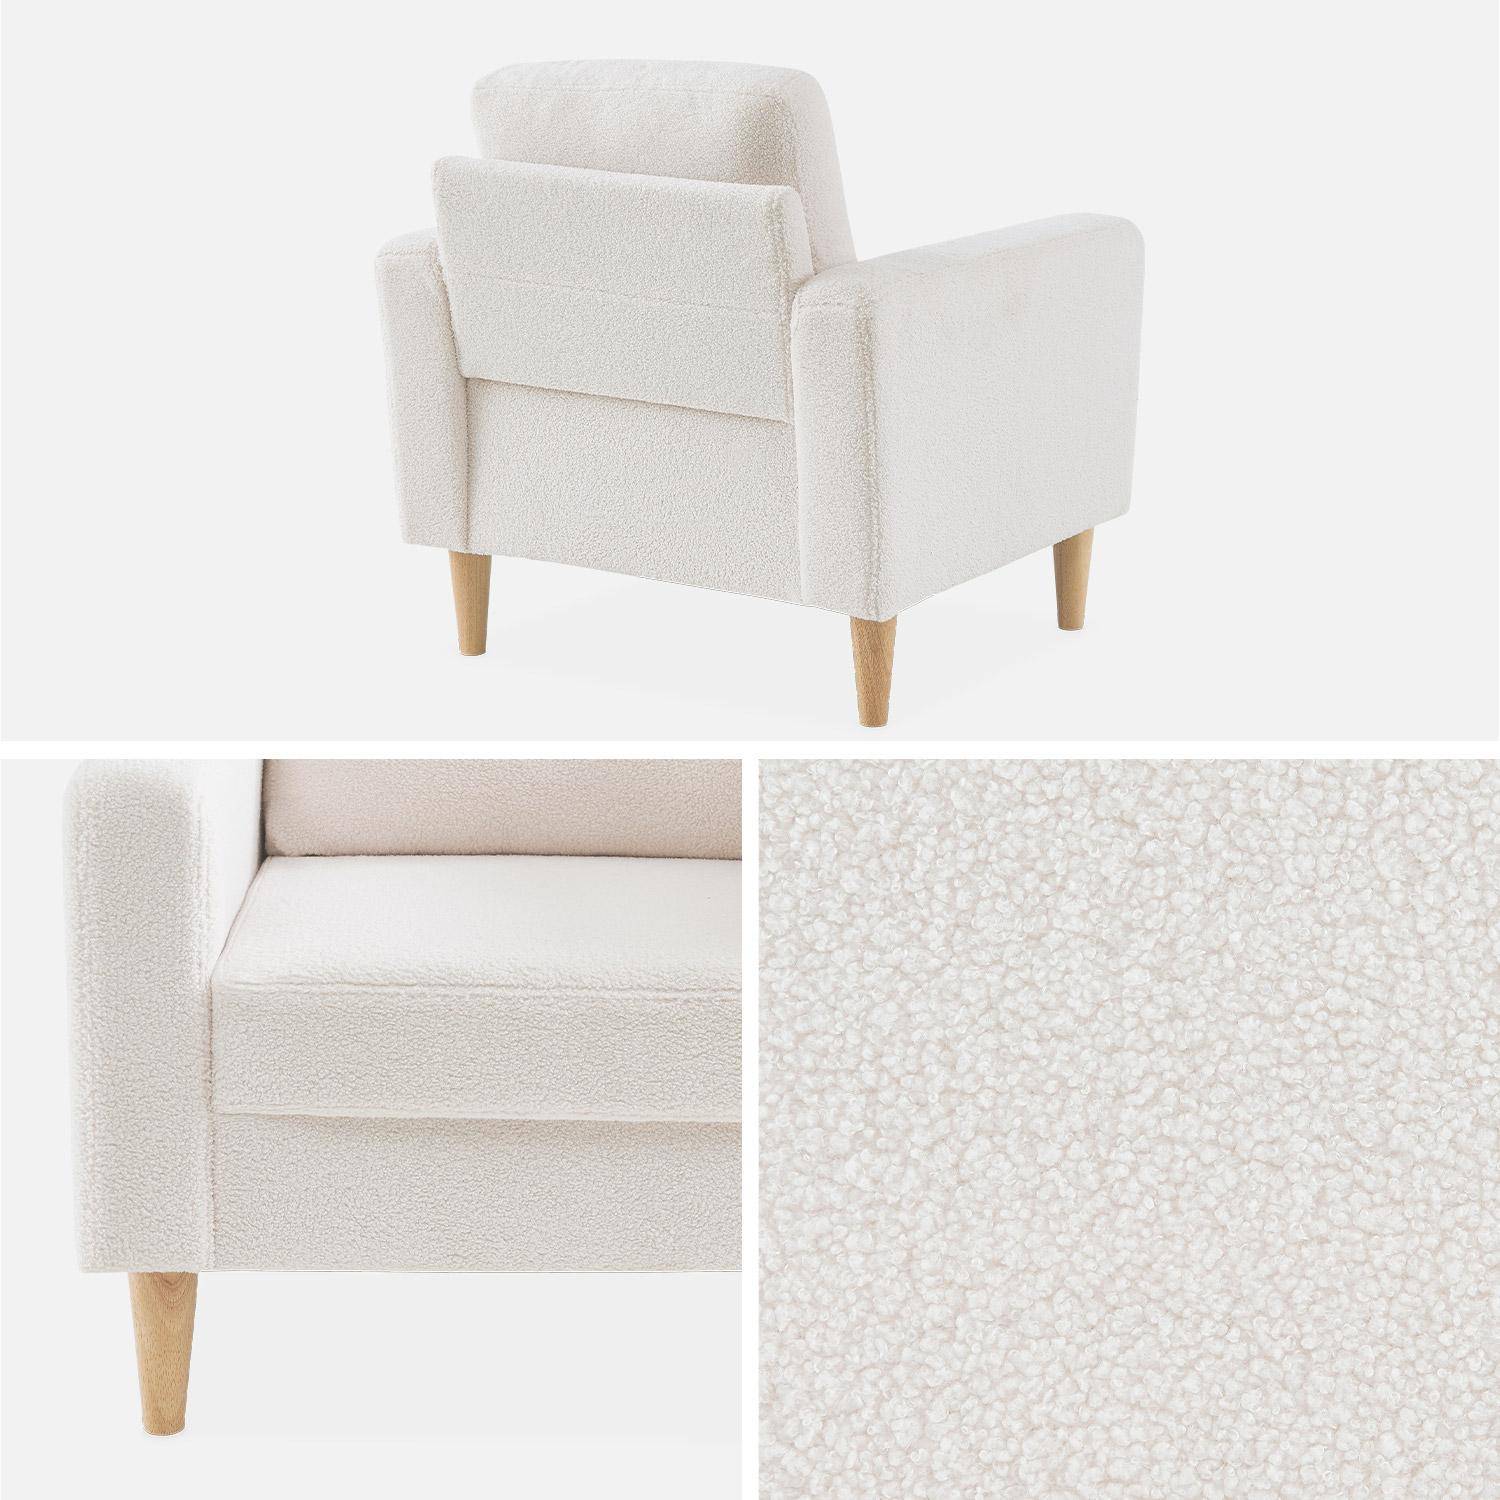 3-seater sofa Scandi-style and armchair with wooden legs, white boucle, Bjorn duo,sweeek,Photo5